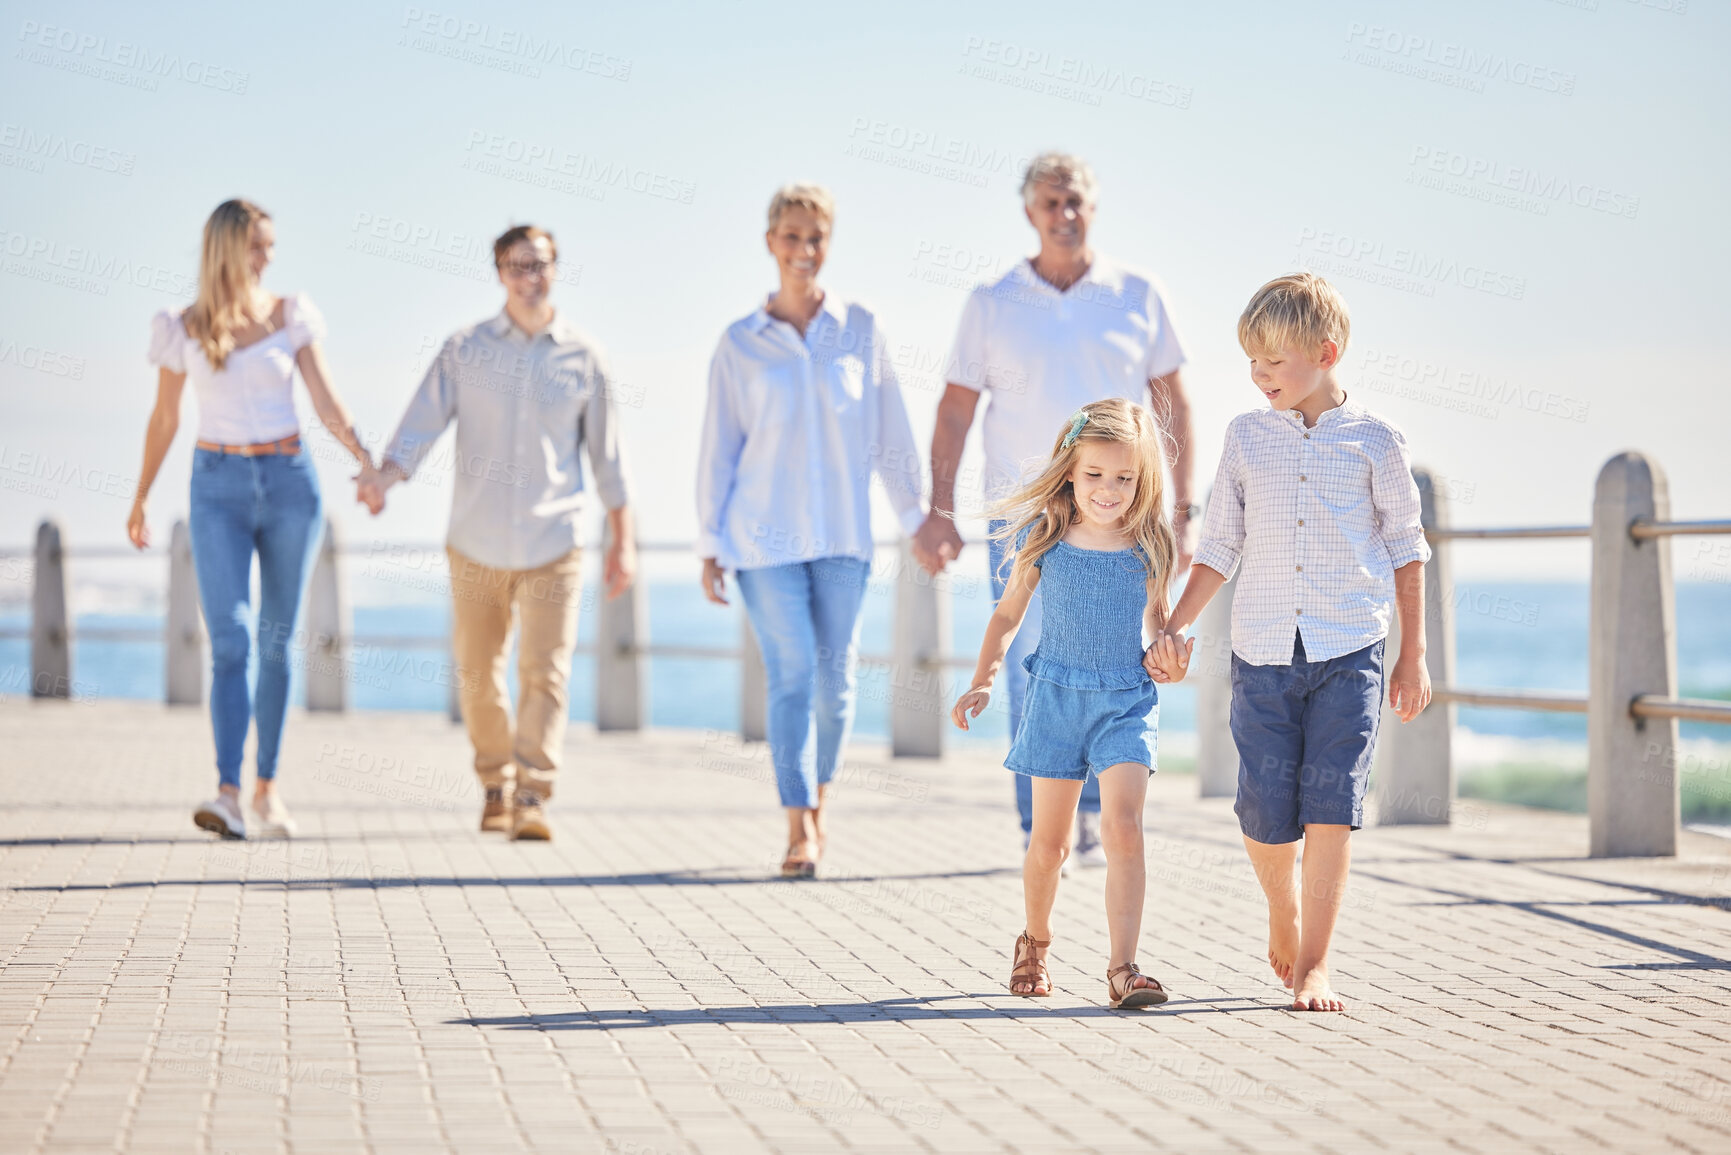 Buy stock photo Adorable little sibling brother and sister holding hands while walking ahead on a seaside promenade while their parents and grandparents follow on a sunny day. Multi-generation family spending time together while on holiday